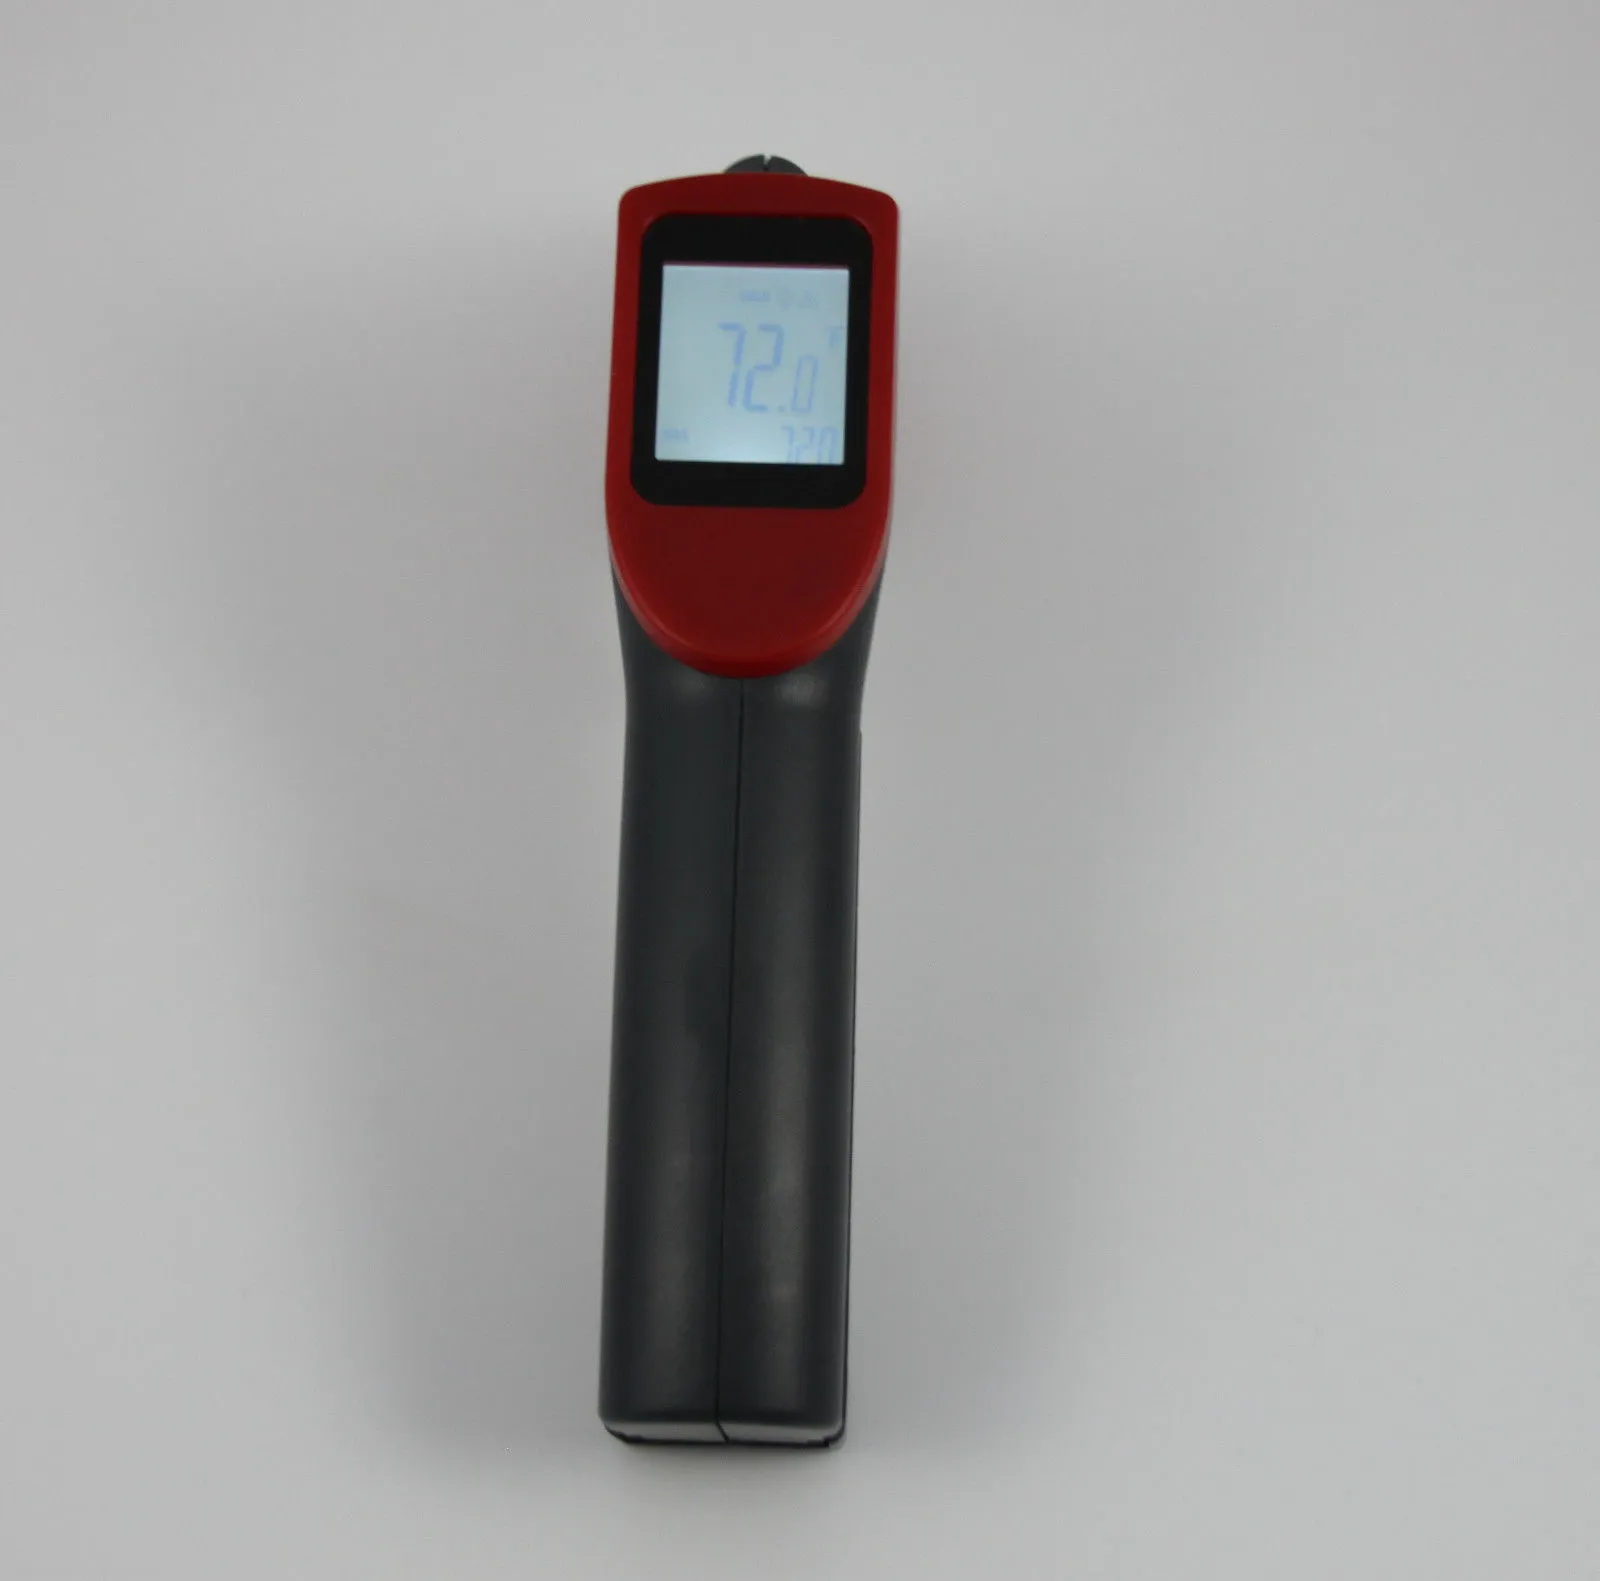 OEMTOOLS Infrared Thermometer